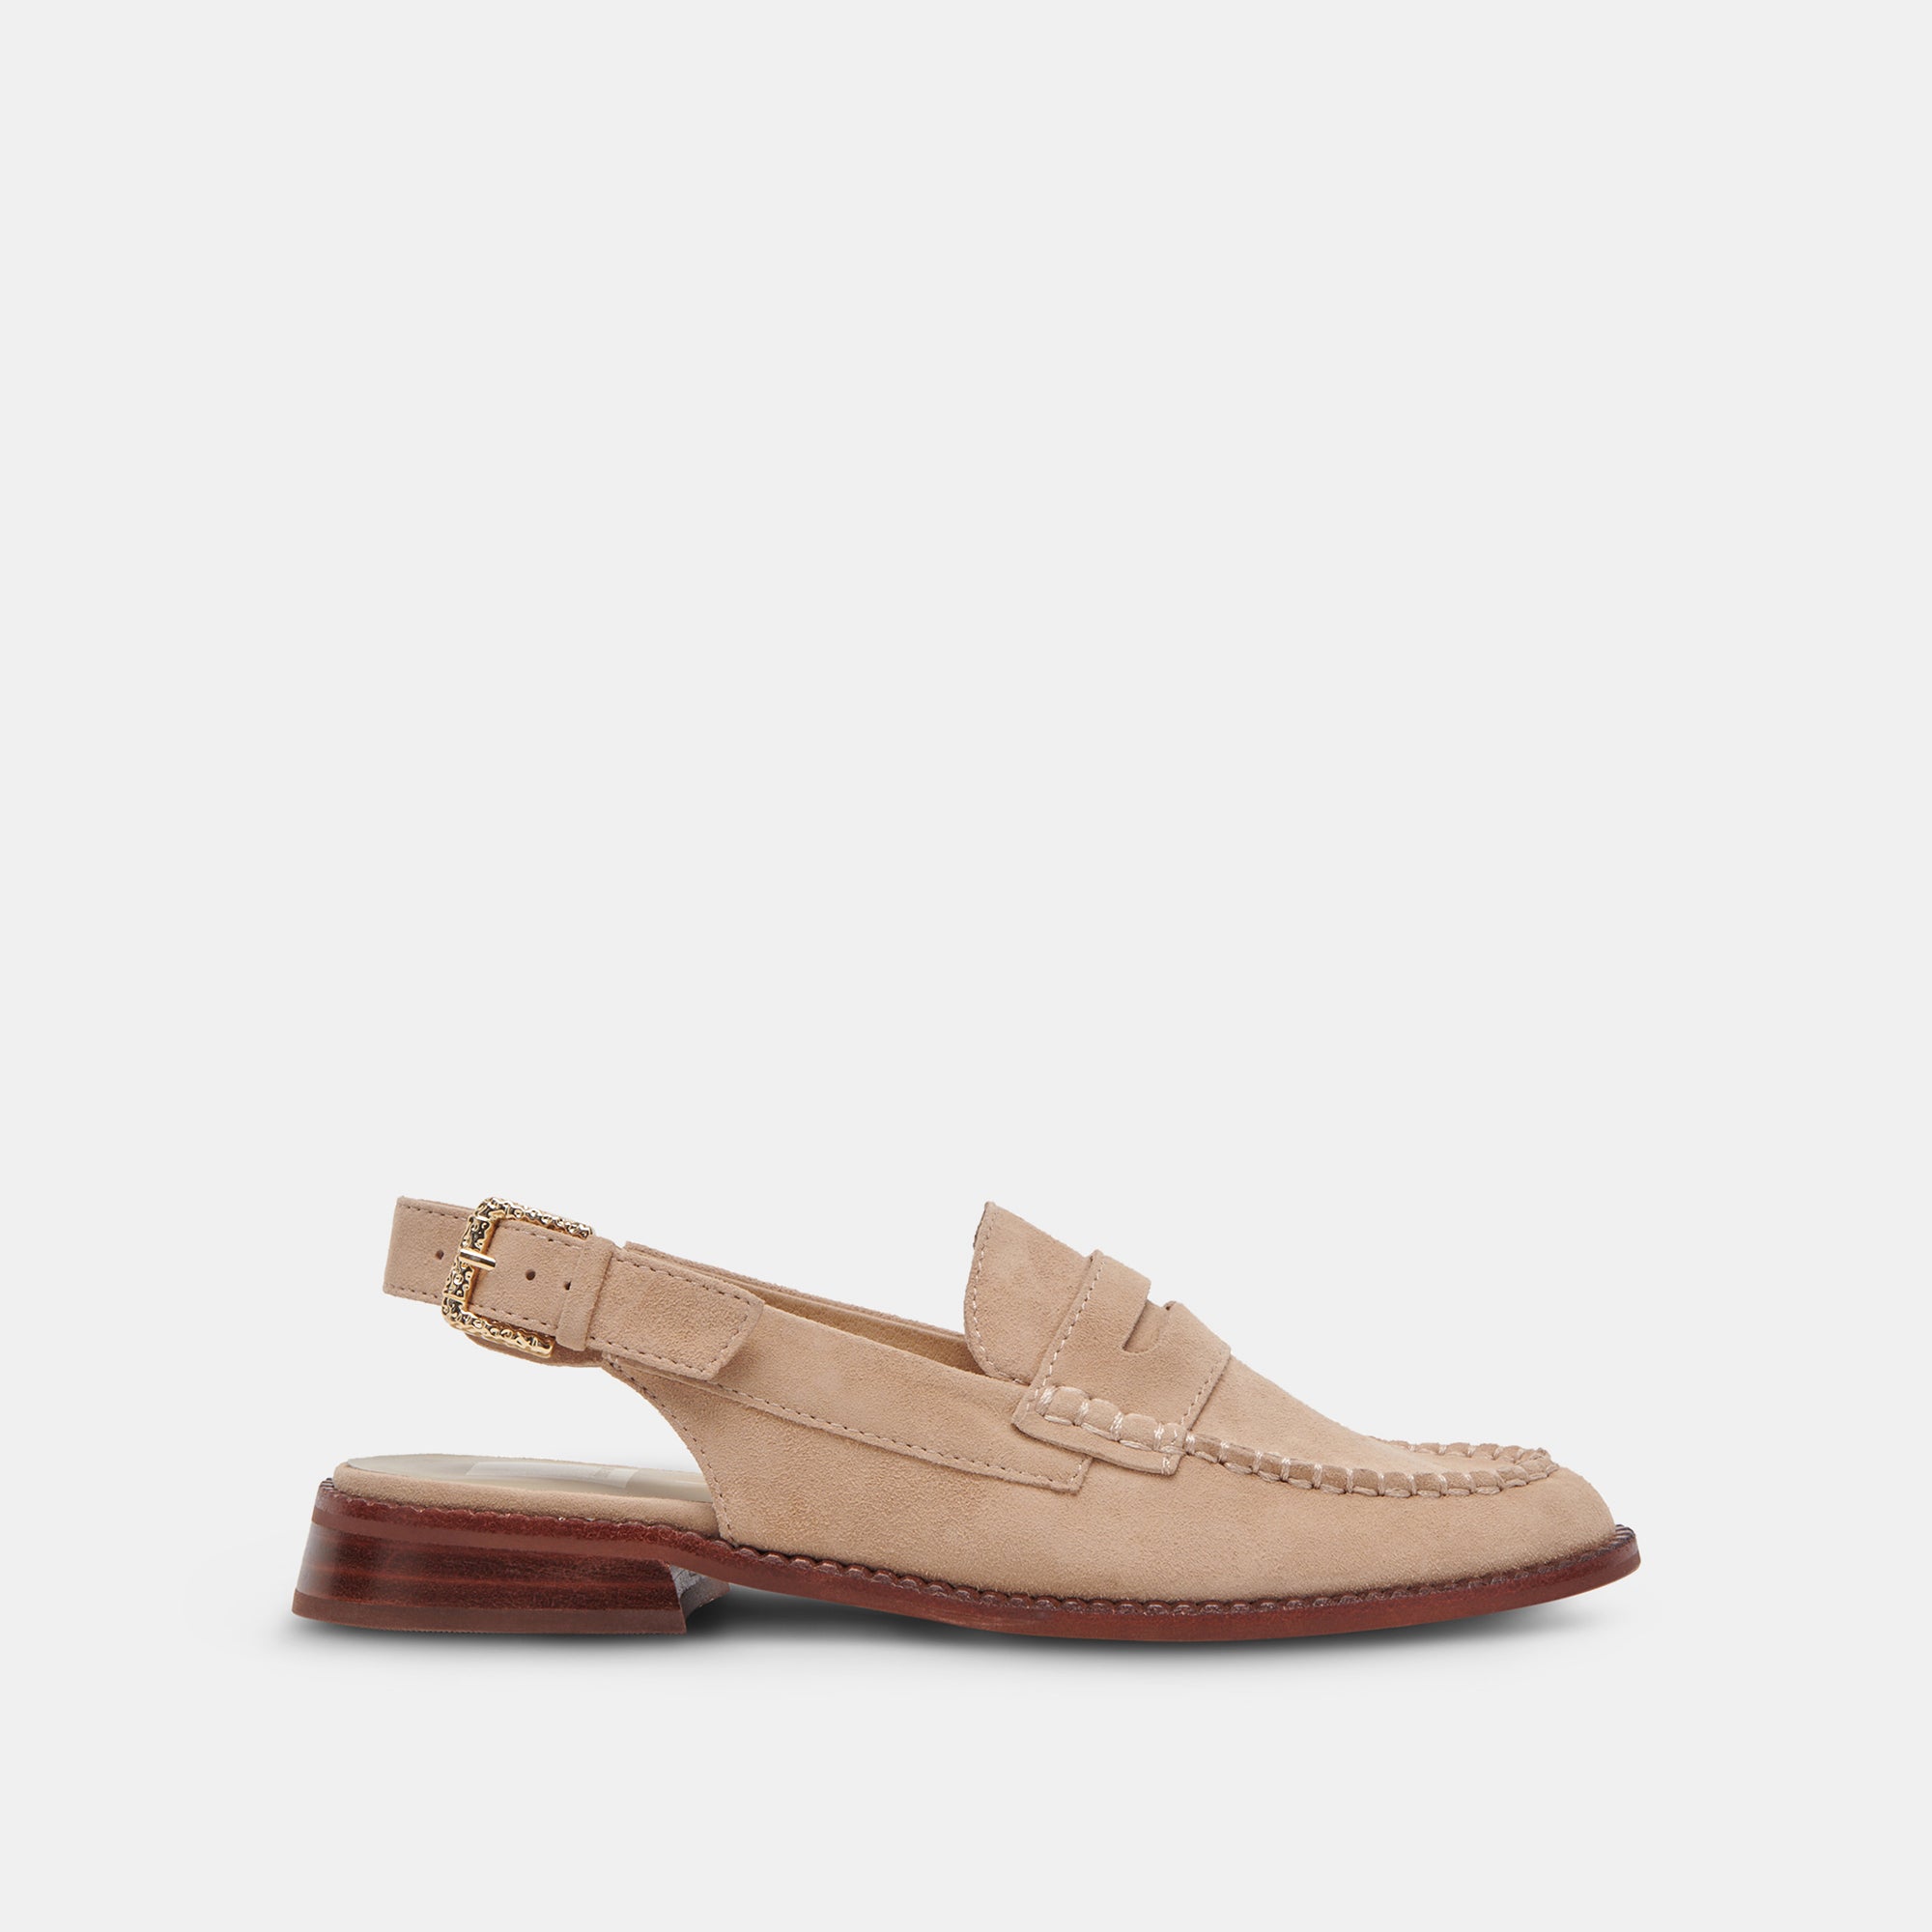 String Moccasin Loafer Shoes - Camel Suede - KAI by Civardi